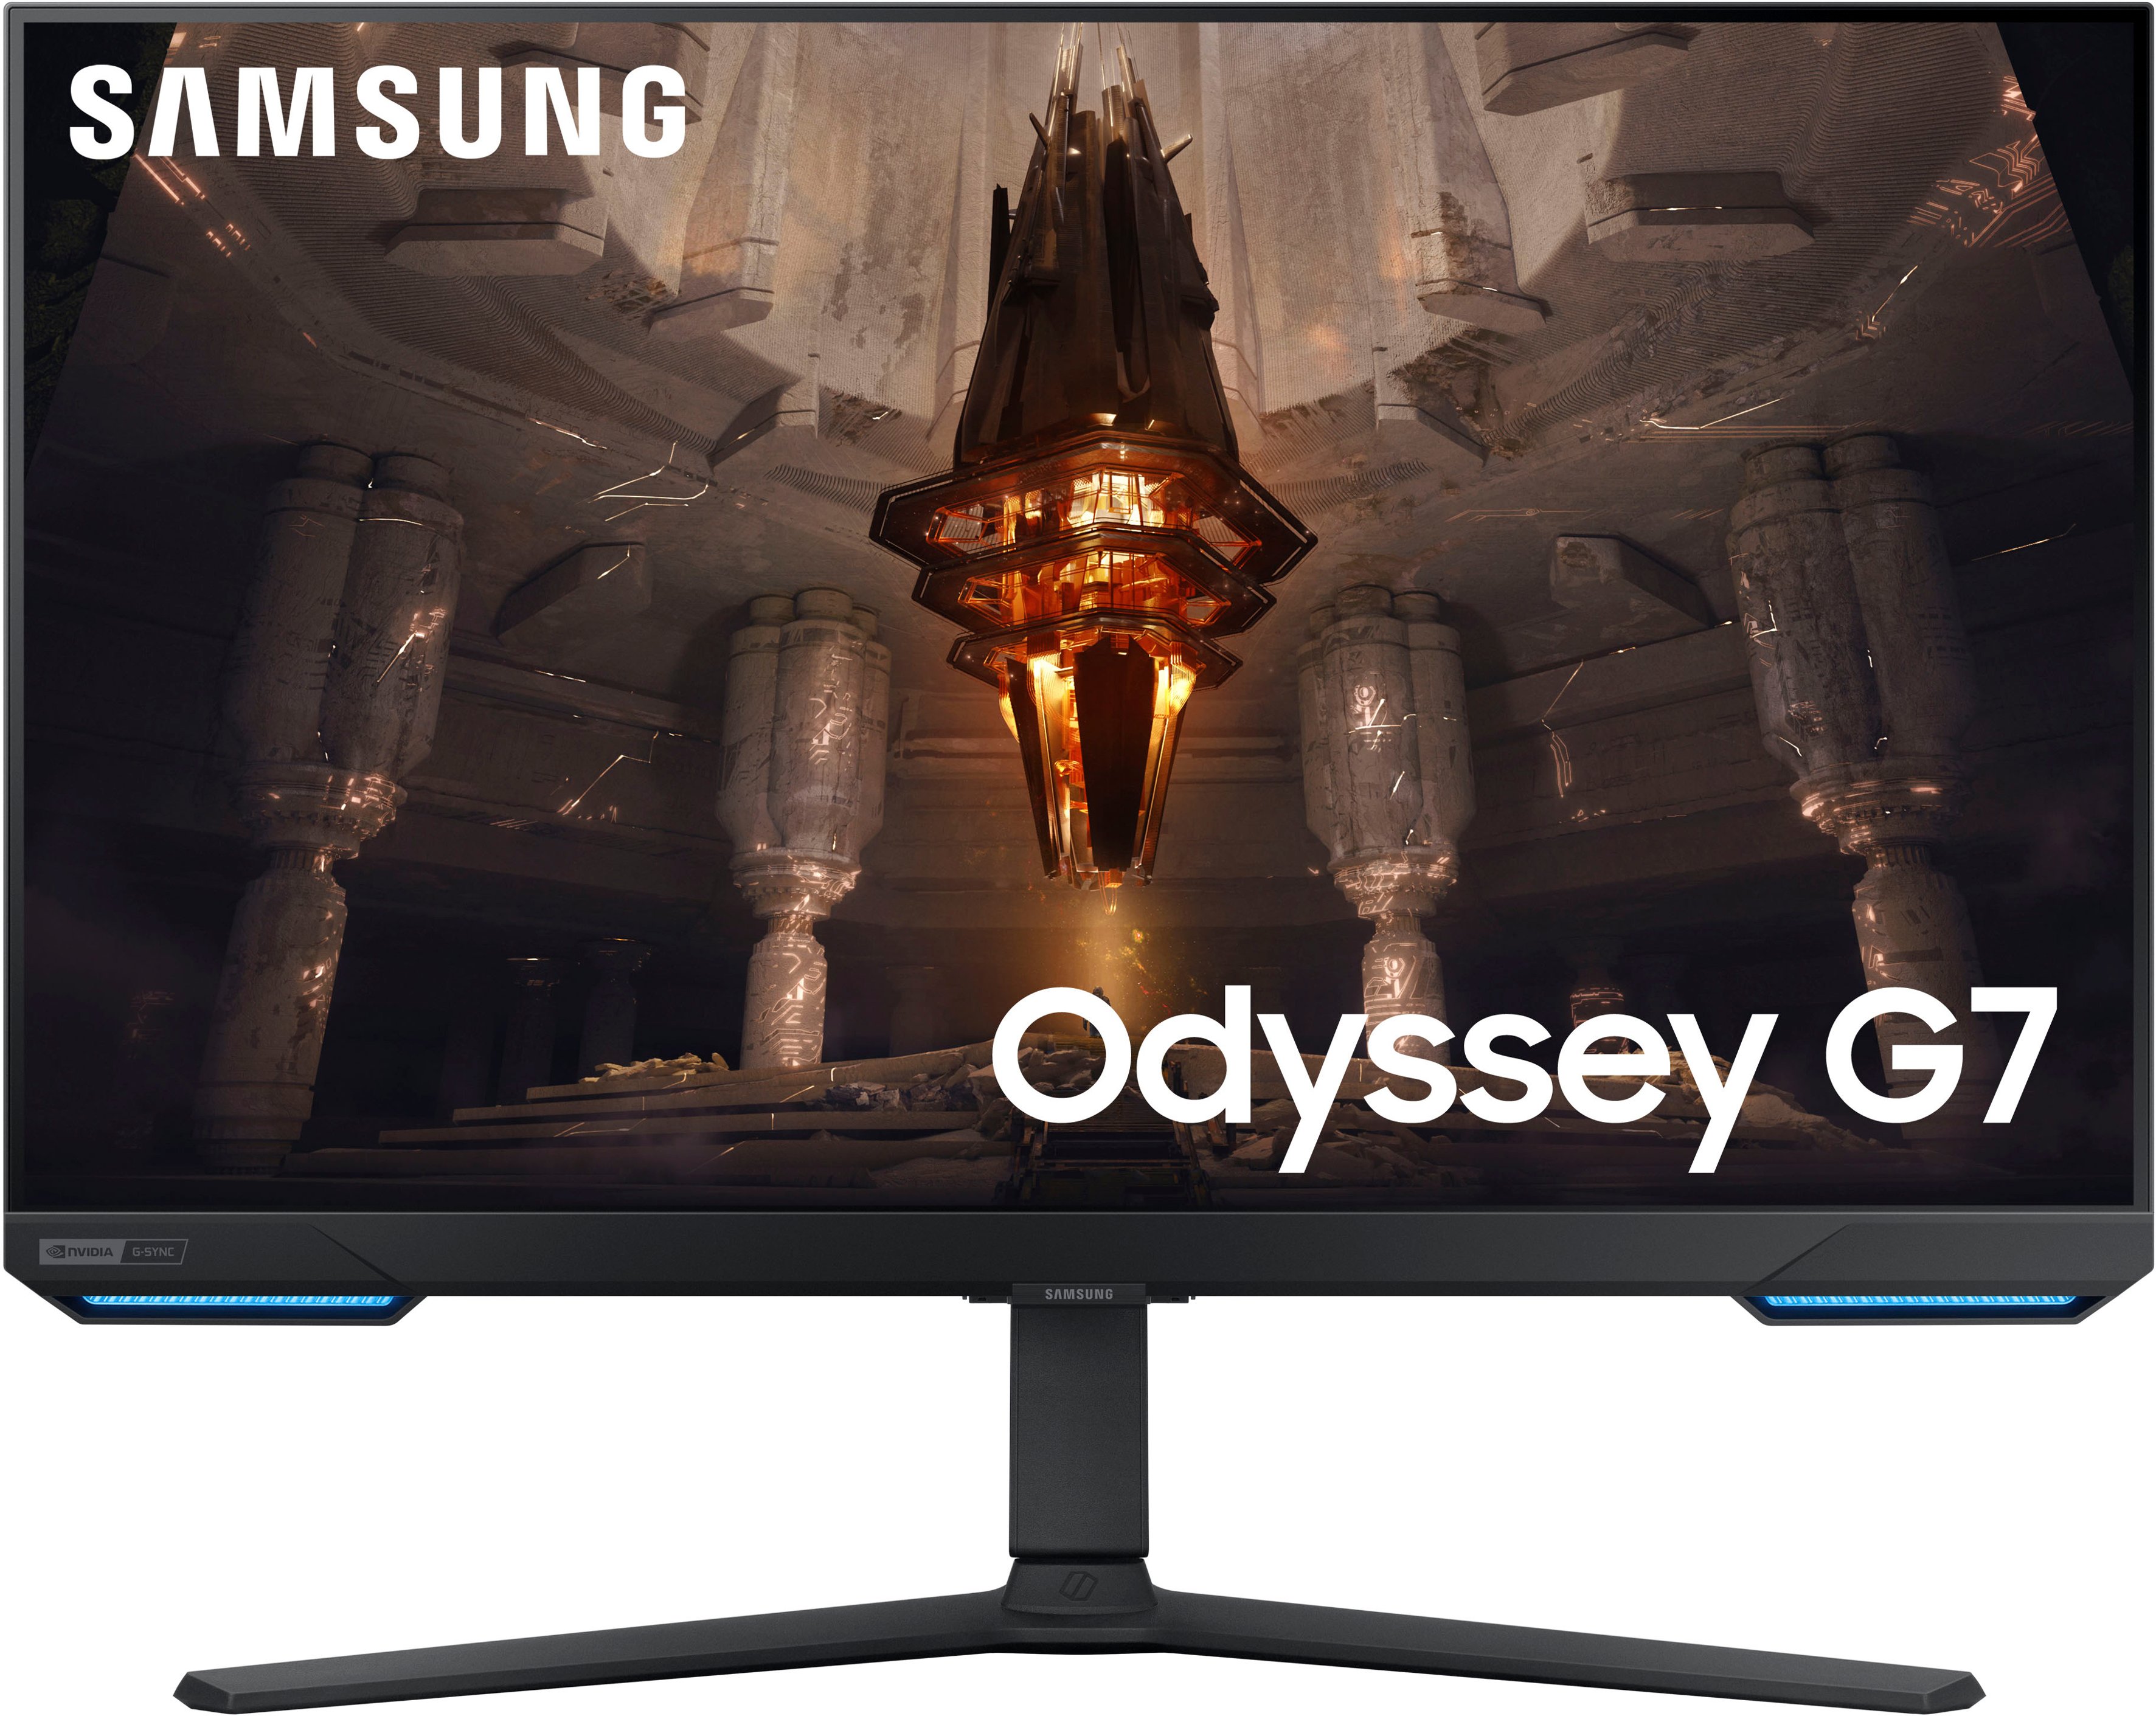 Samsung Launches New Odyssey Neo G8, G7 and G4 Models Including